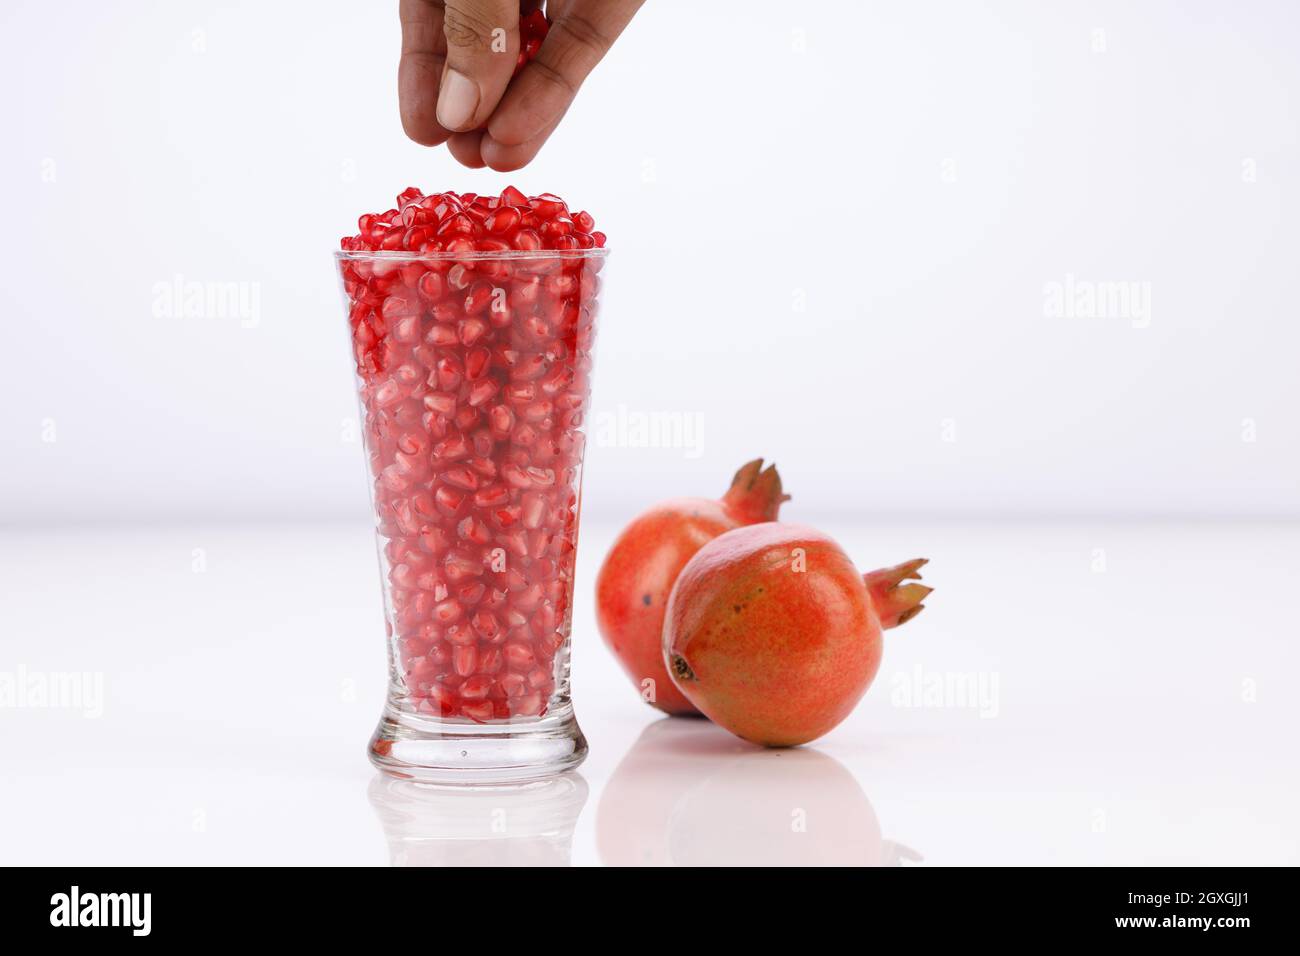 Fresh Pomegranate seed arranged in a glass container with fresh fruit placed beside it on white background, isolated. Stock Photo